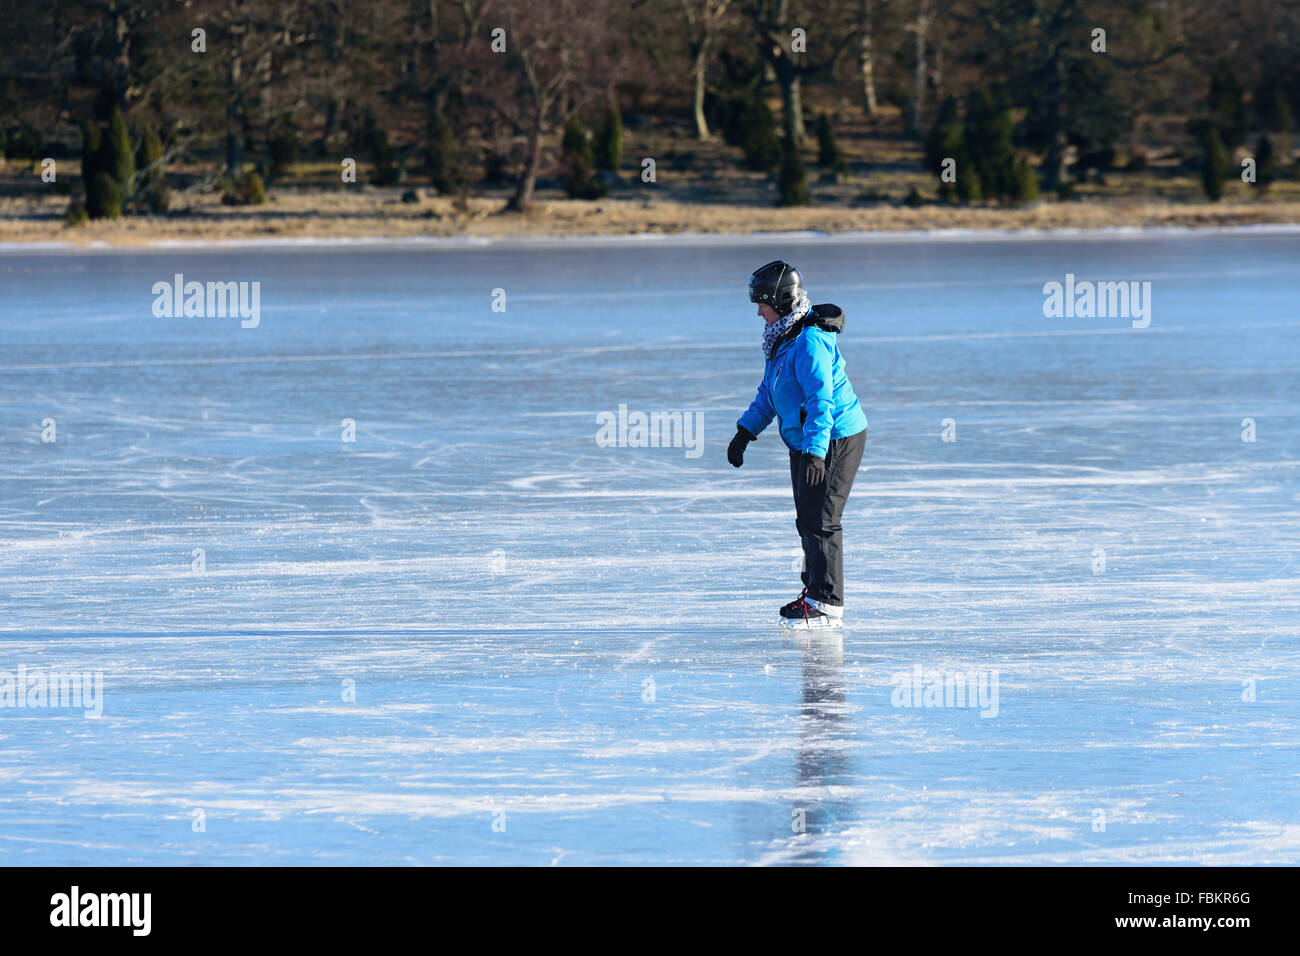 Listerby, Sweden - January 17, 2016: An unknown person is trying to skate on sea ice. The person looks a bit weary and uncertain Stock Photo